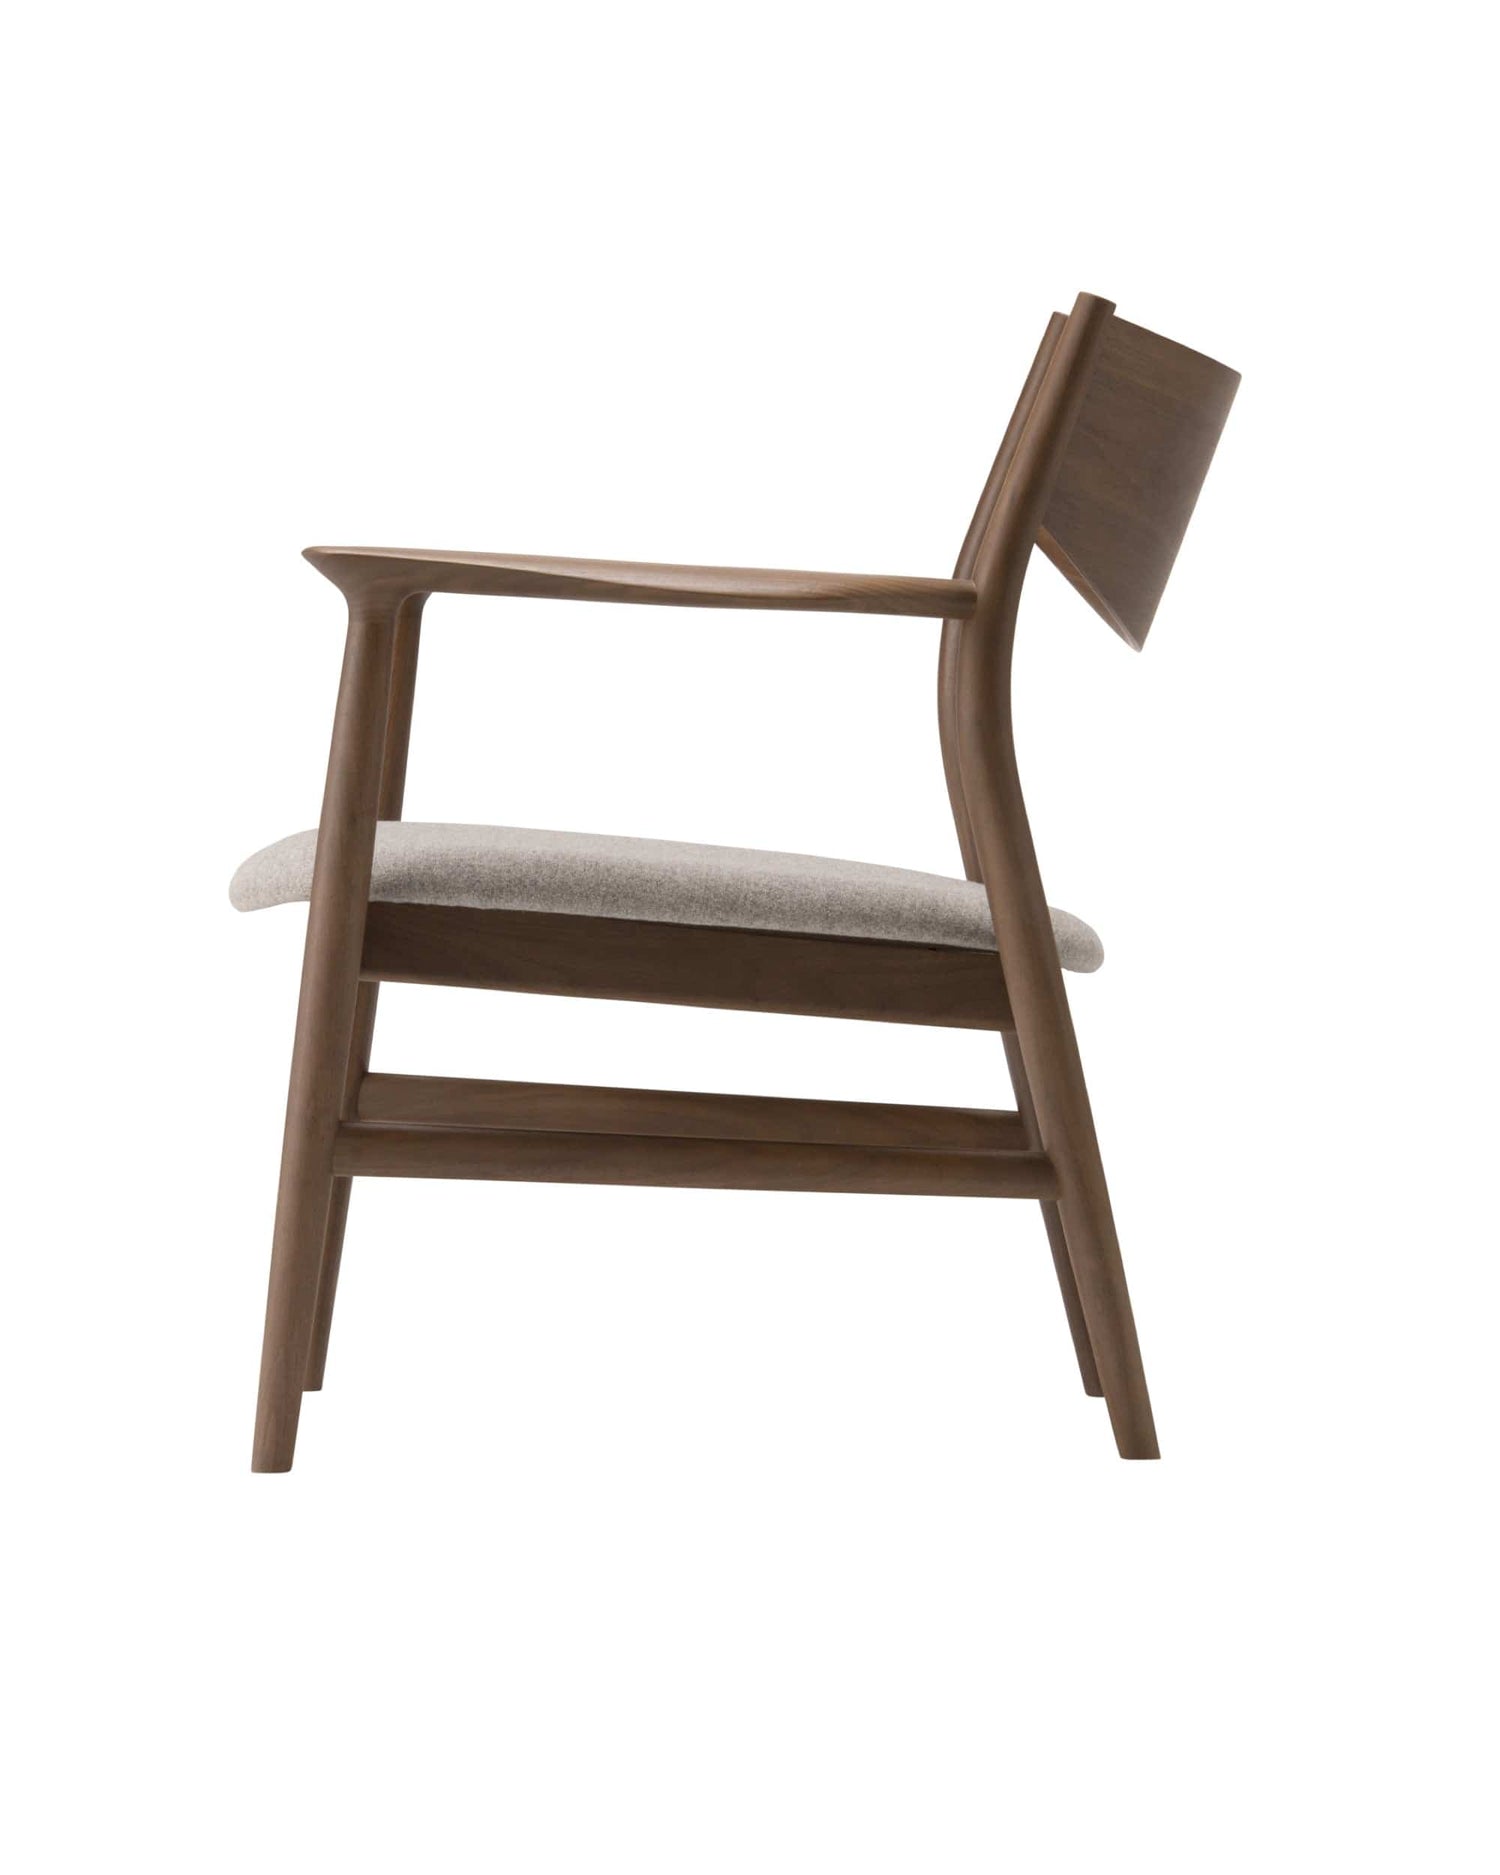 KAMUY Lounge Chair (Wooden Back), Walnut Natural